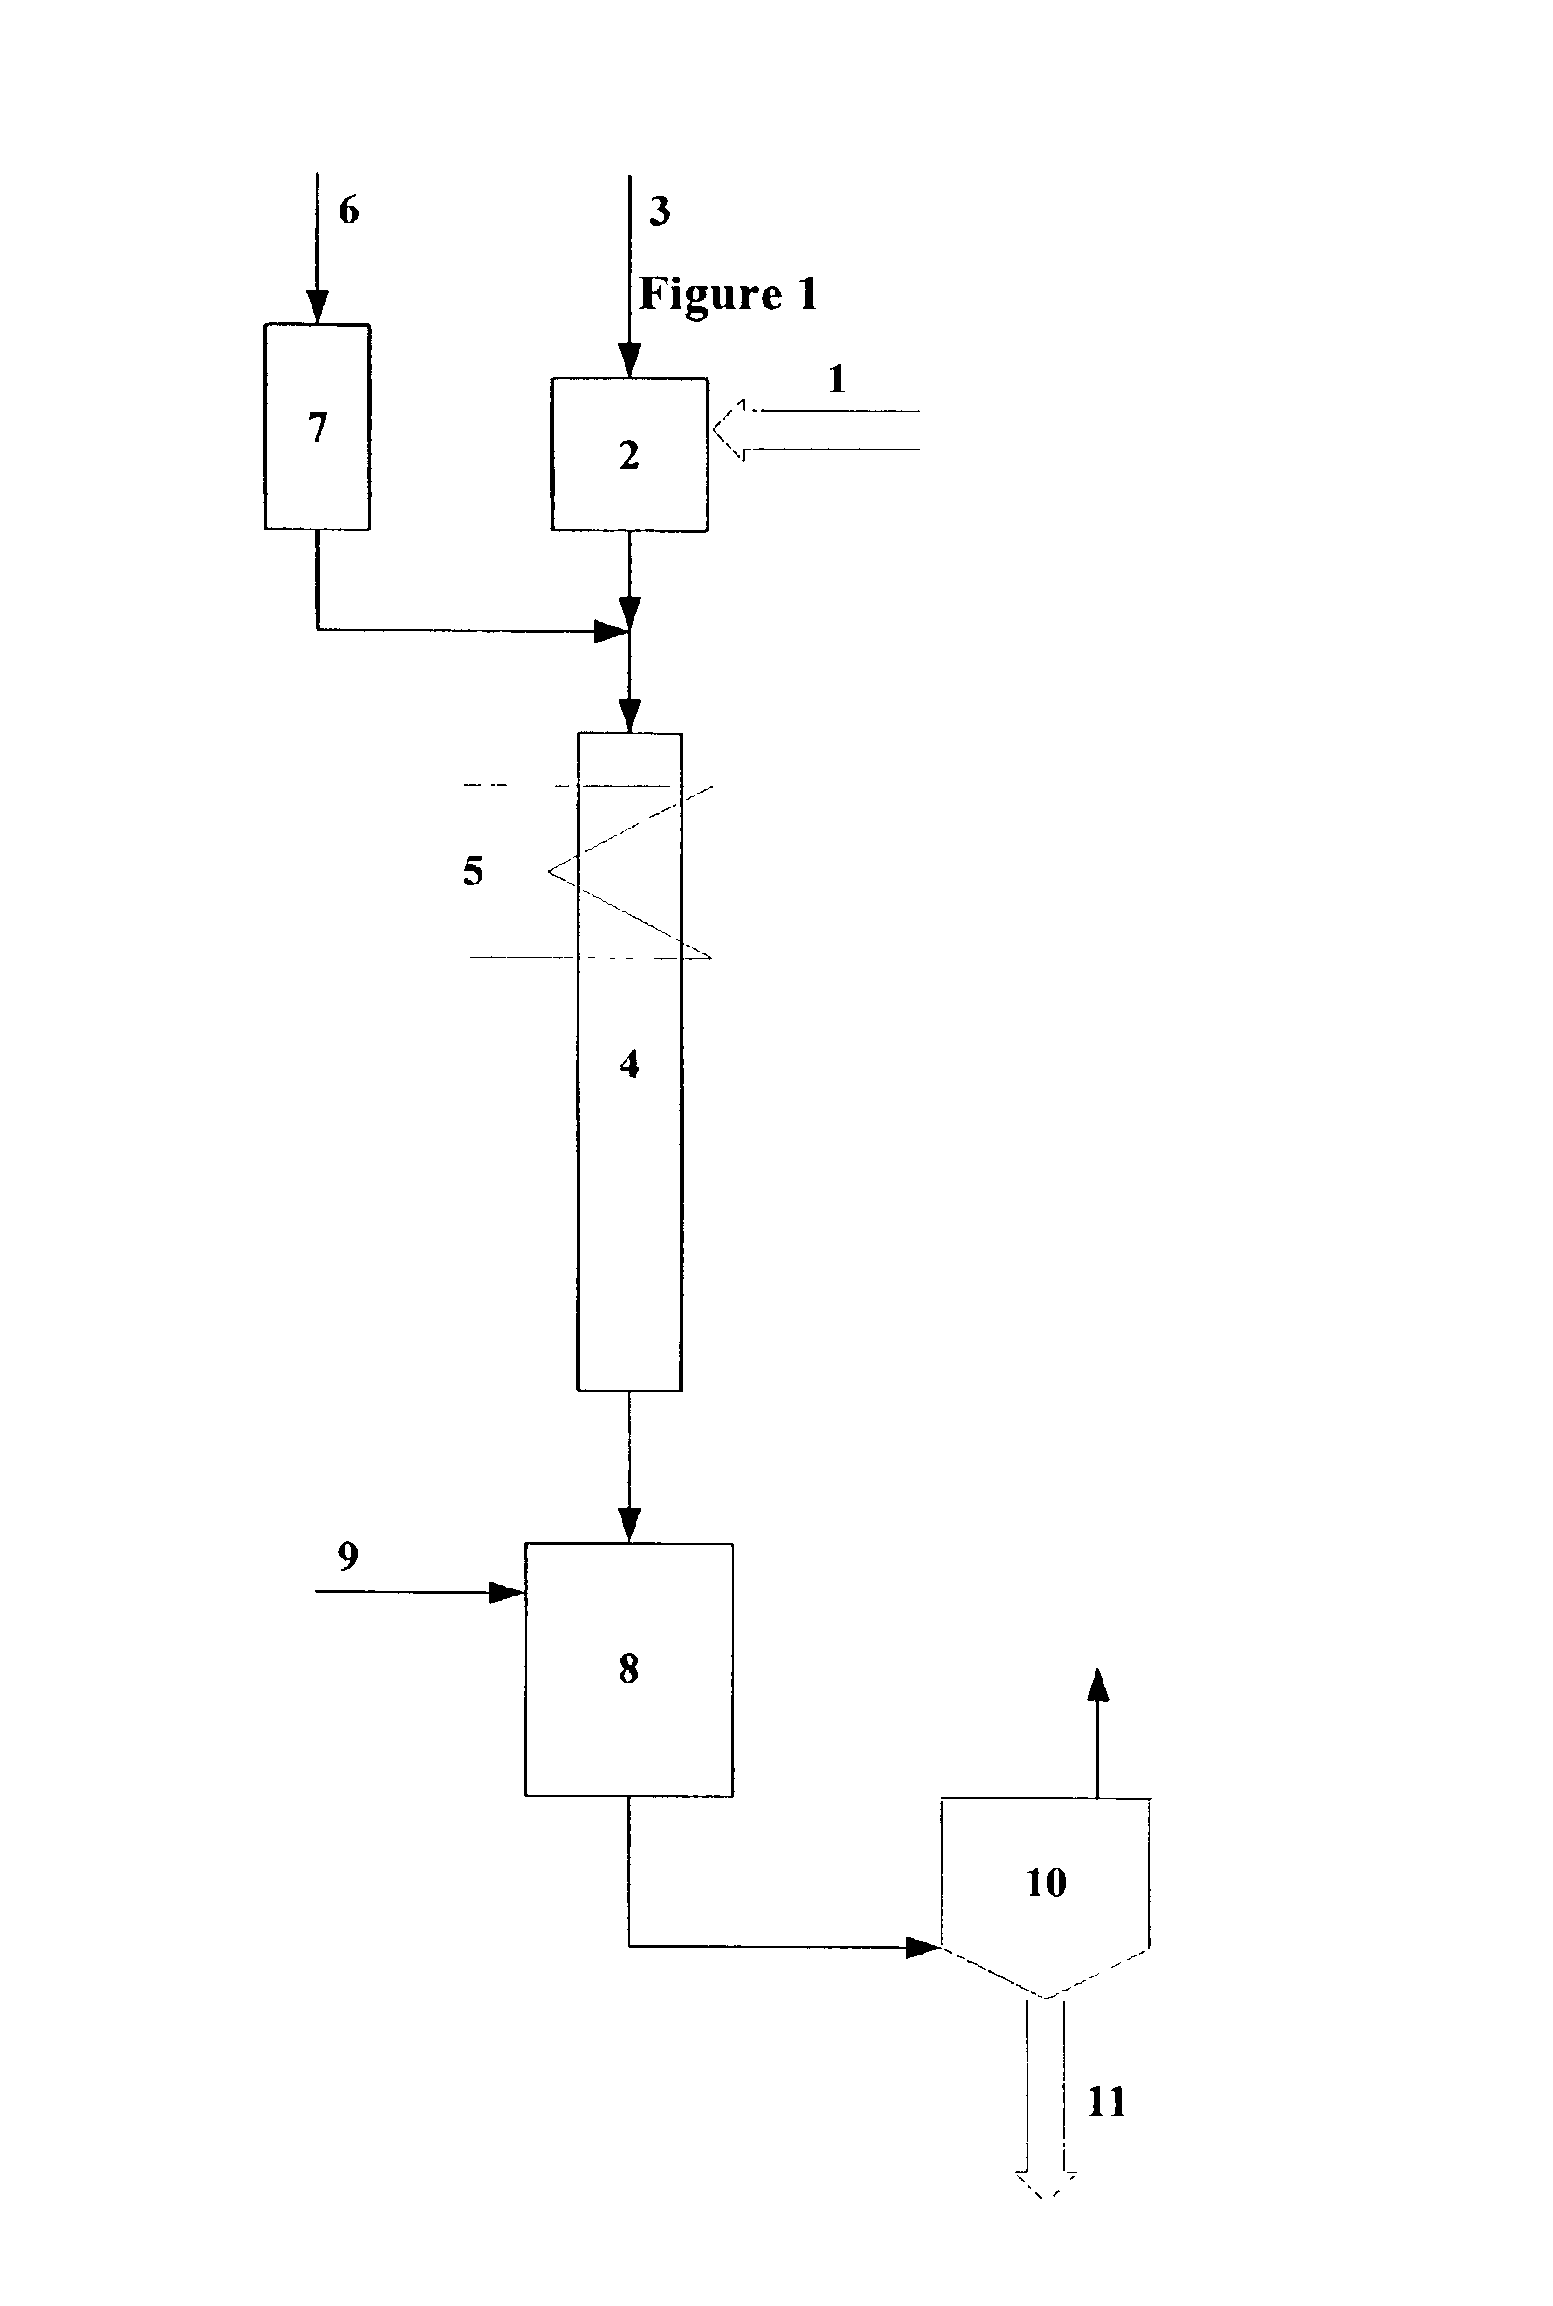 Noble metal-containing supported catalyst and a process for its preparation